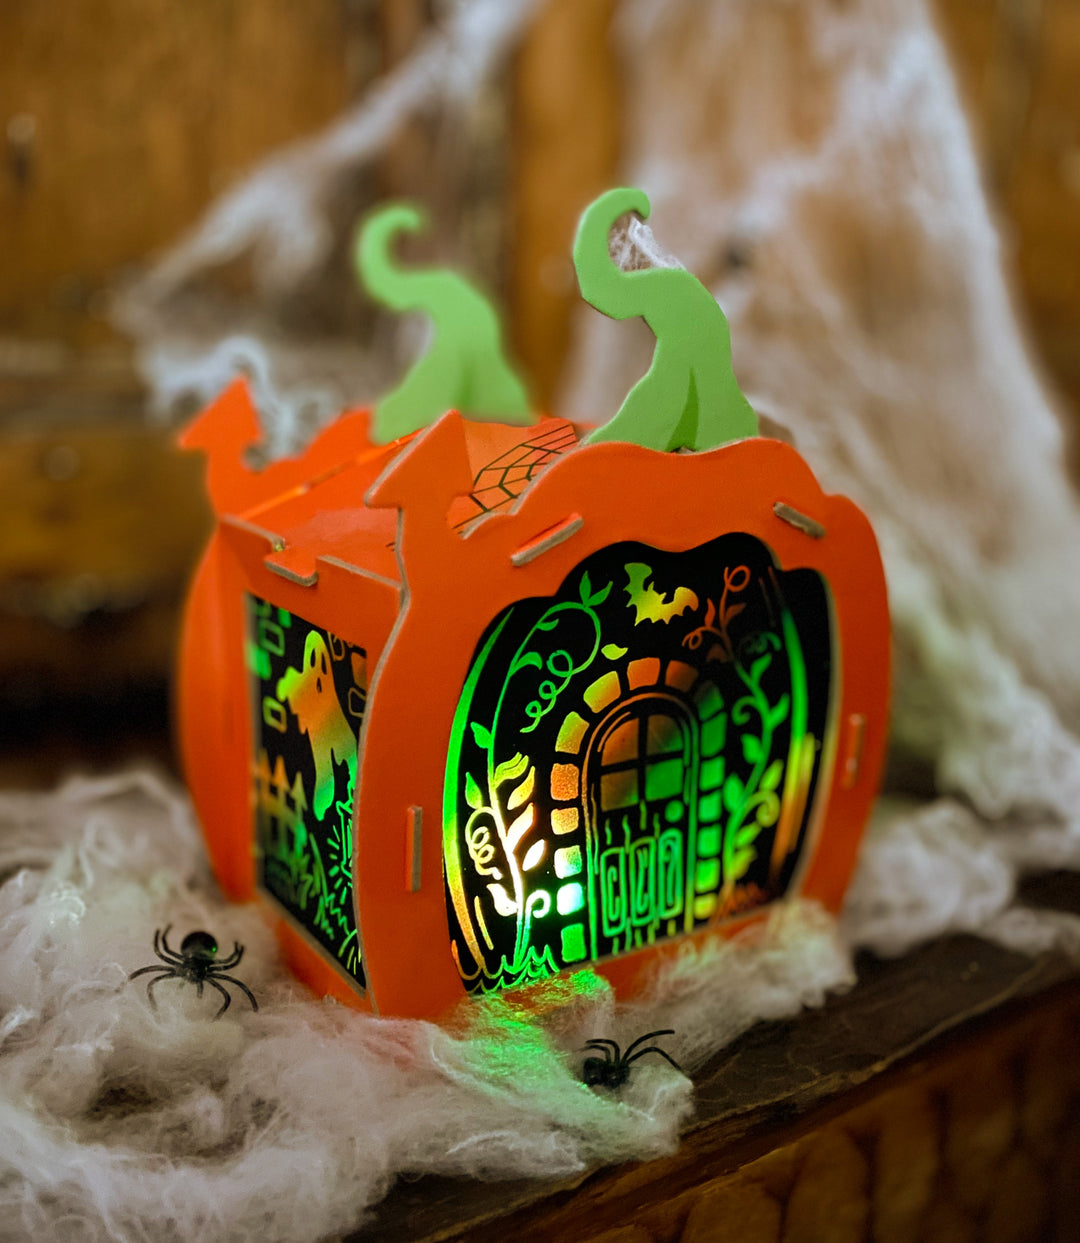 Image of the completed Totally Spooky Pumpkin Lantern Scratch Art that is glowing green. 